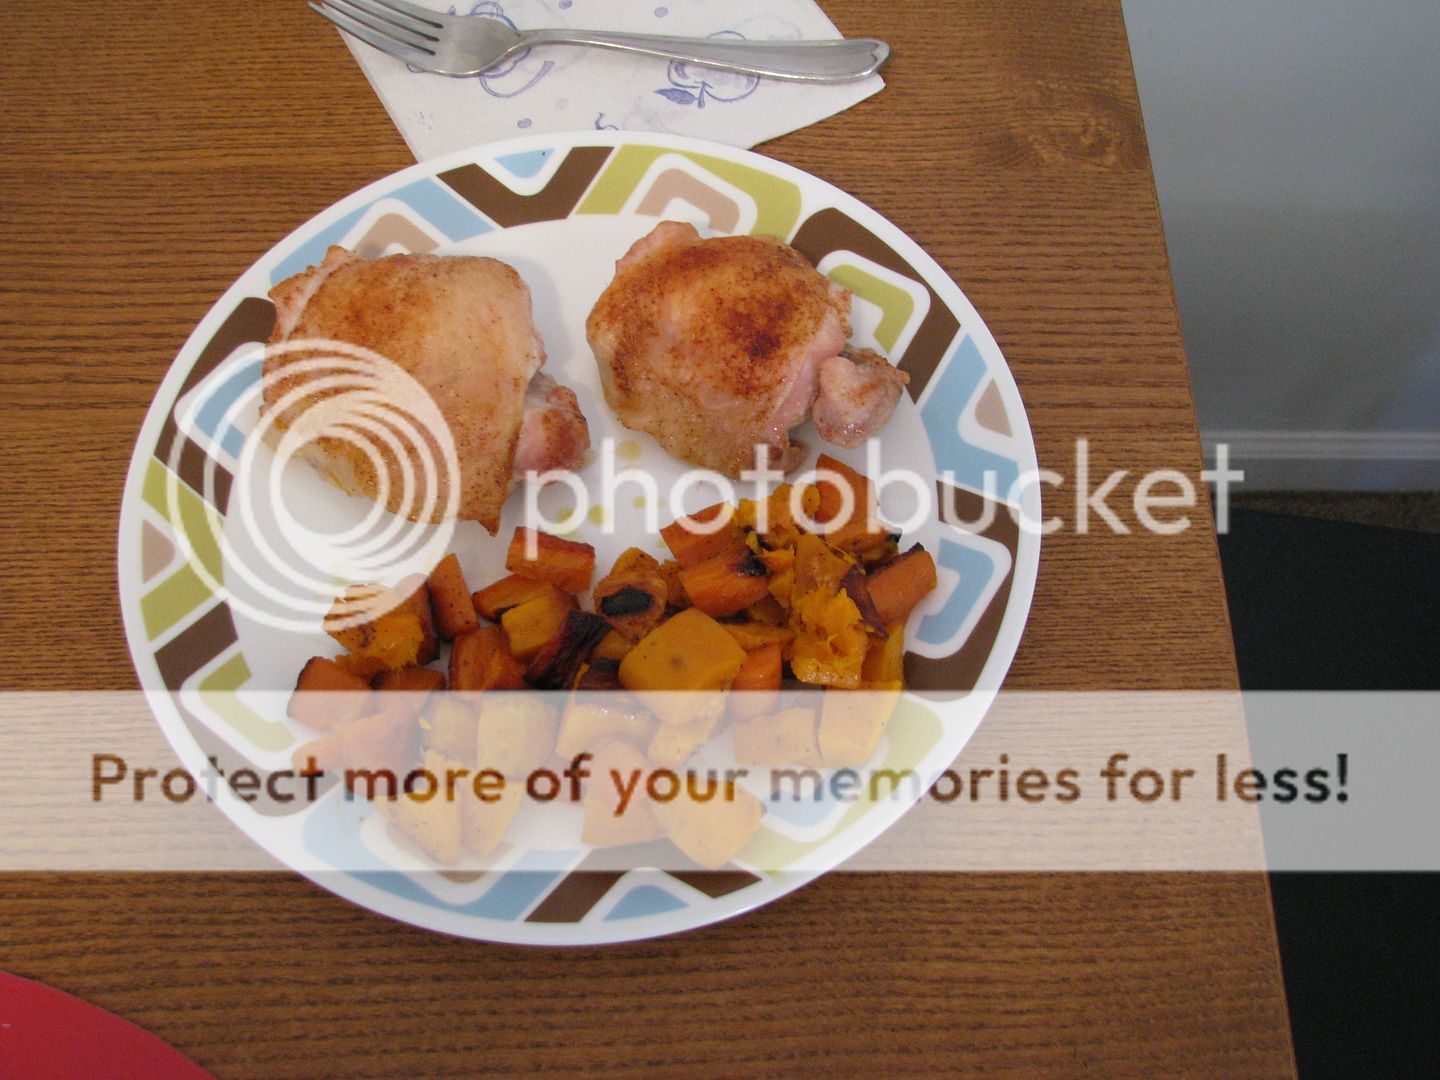 Chicken, carrots, and sweet potatoes